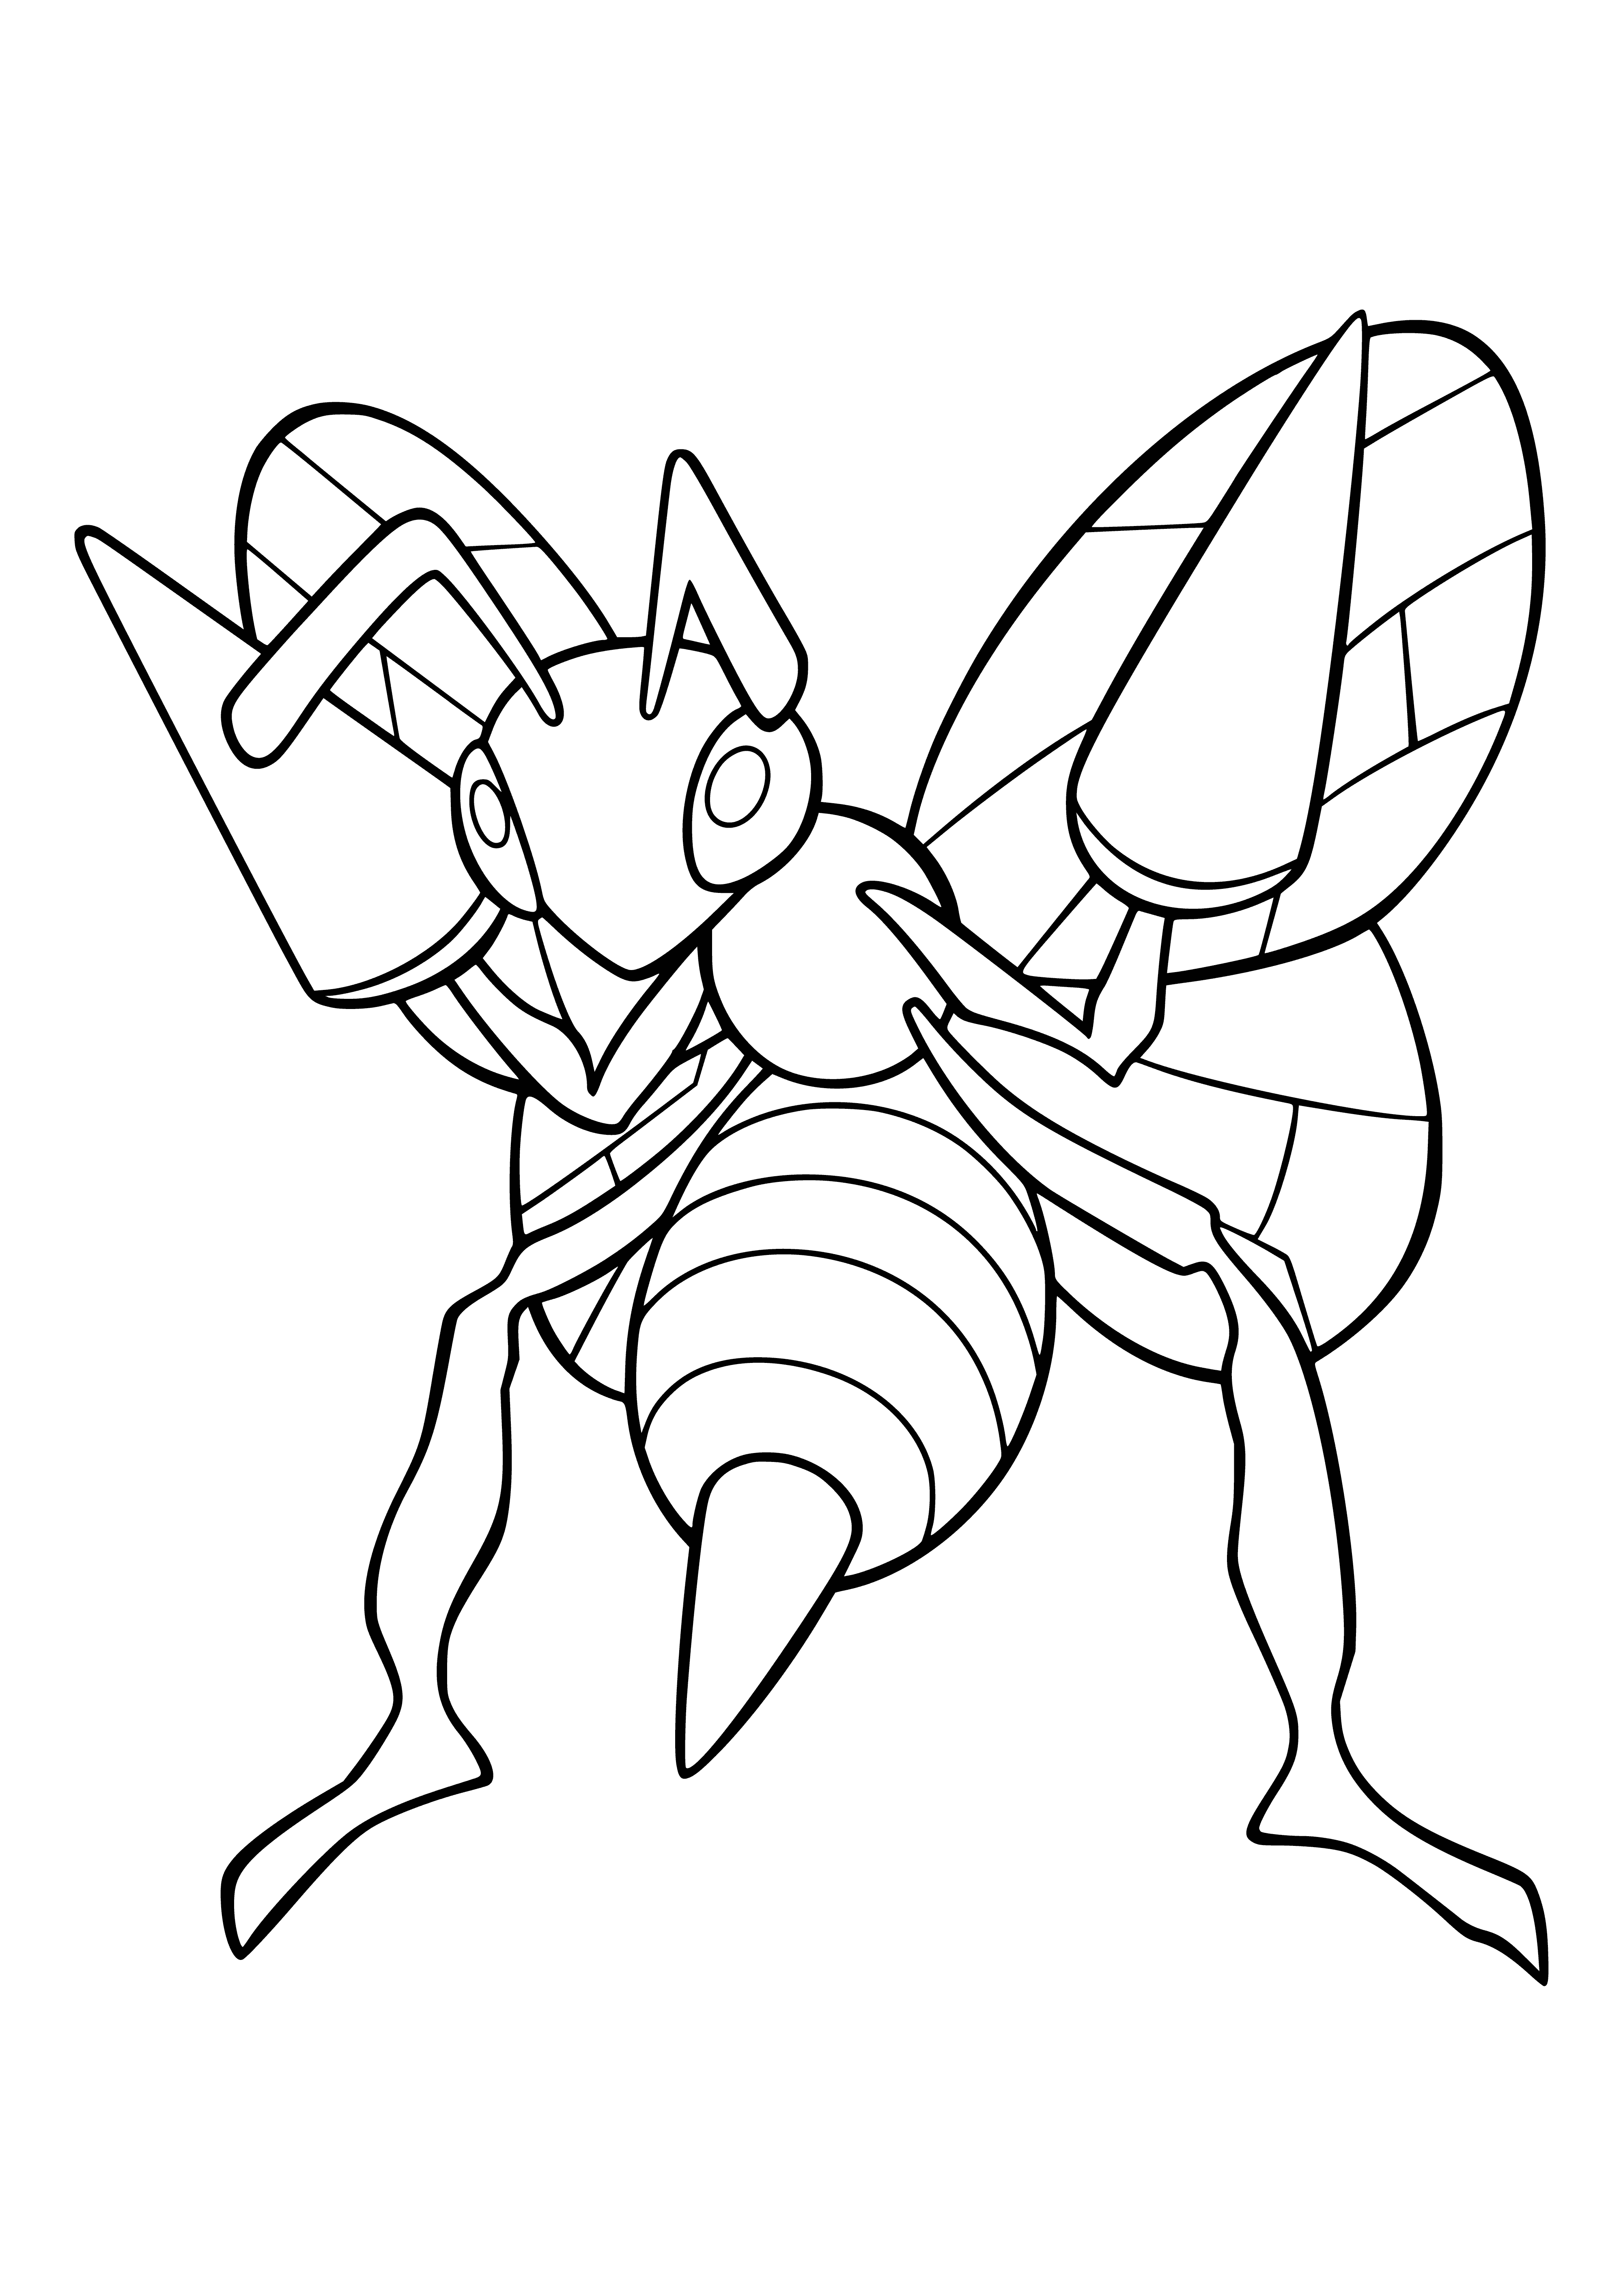 coloring page: Large yellow/black Pokemon w/ 2 thin & 3 thick feelers on head/back, thin 6 legs w/ sharp claws, small black wings.